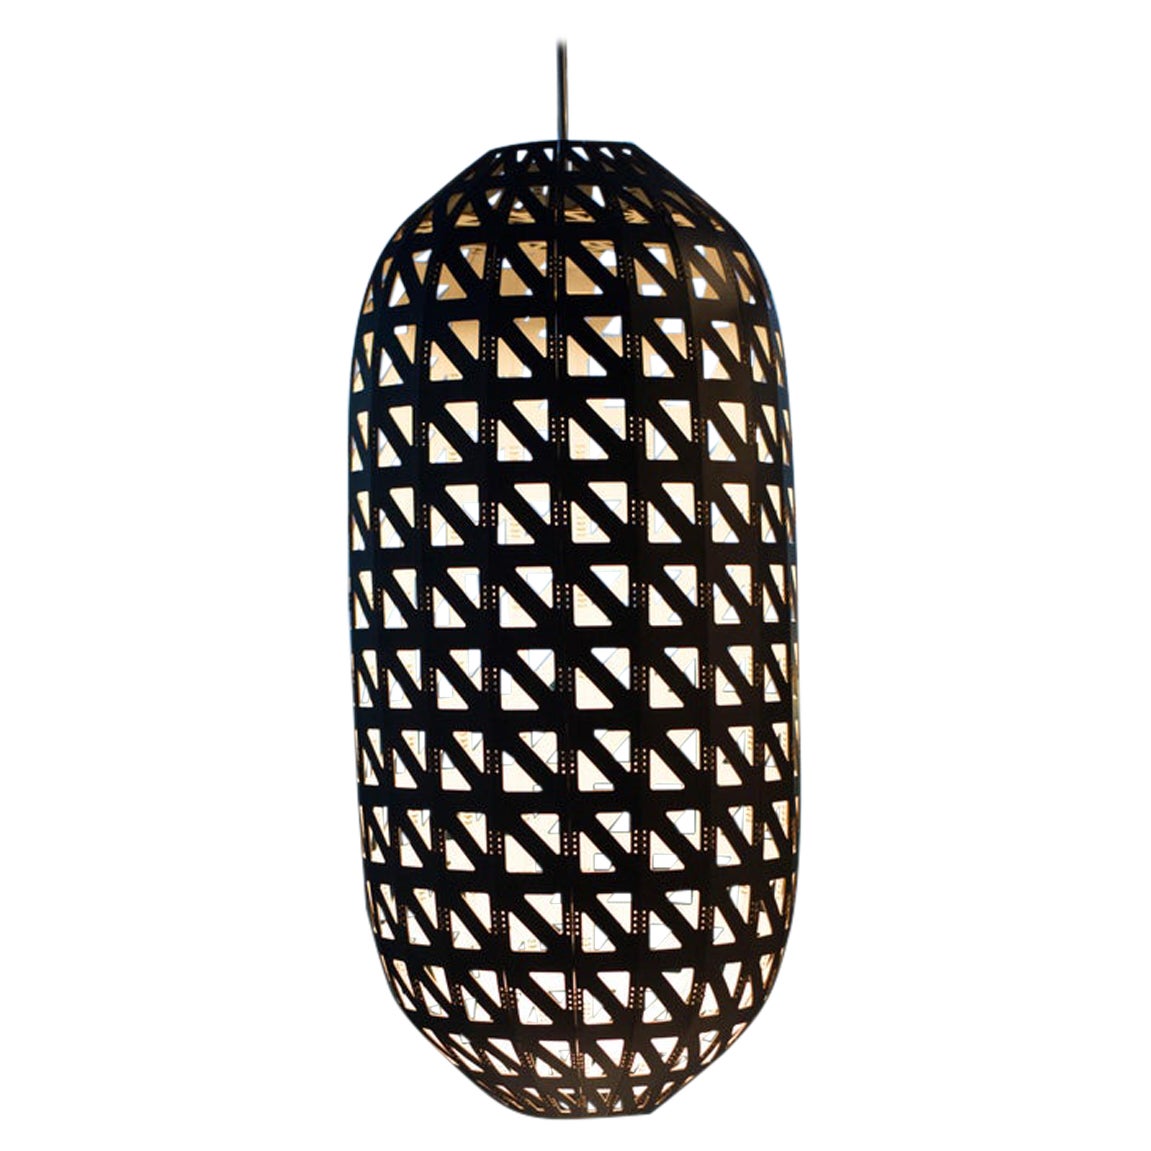 Panelitos Pineaple Lamp Small by Piegatto For Sale